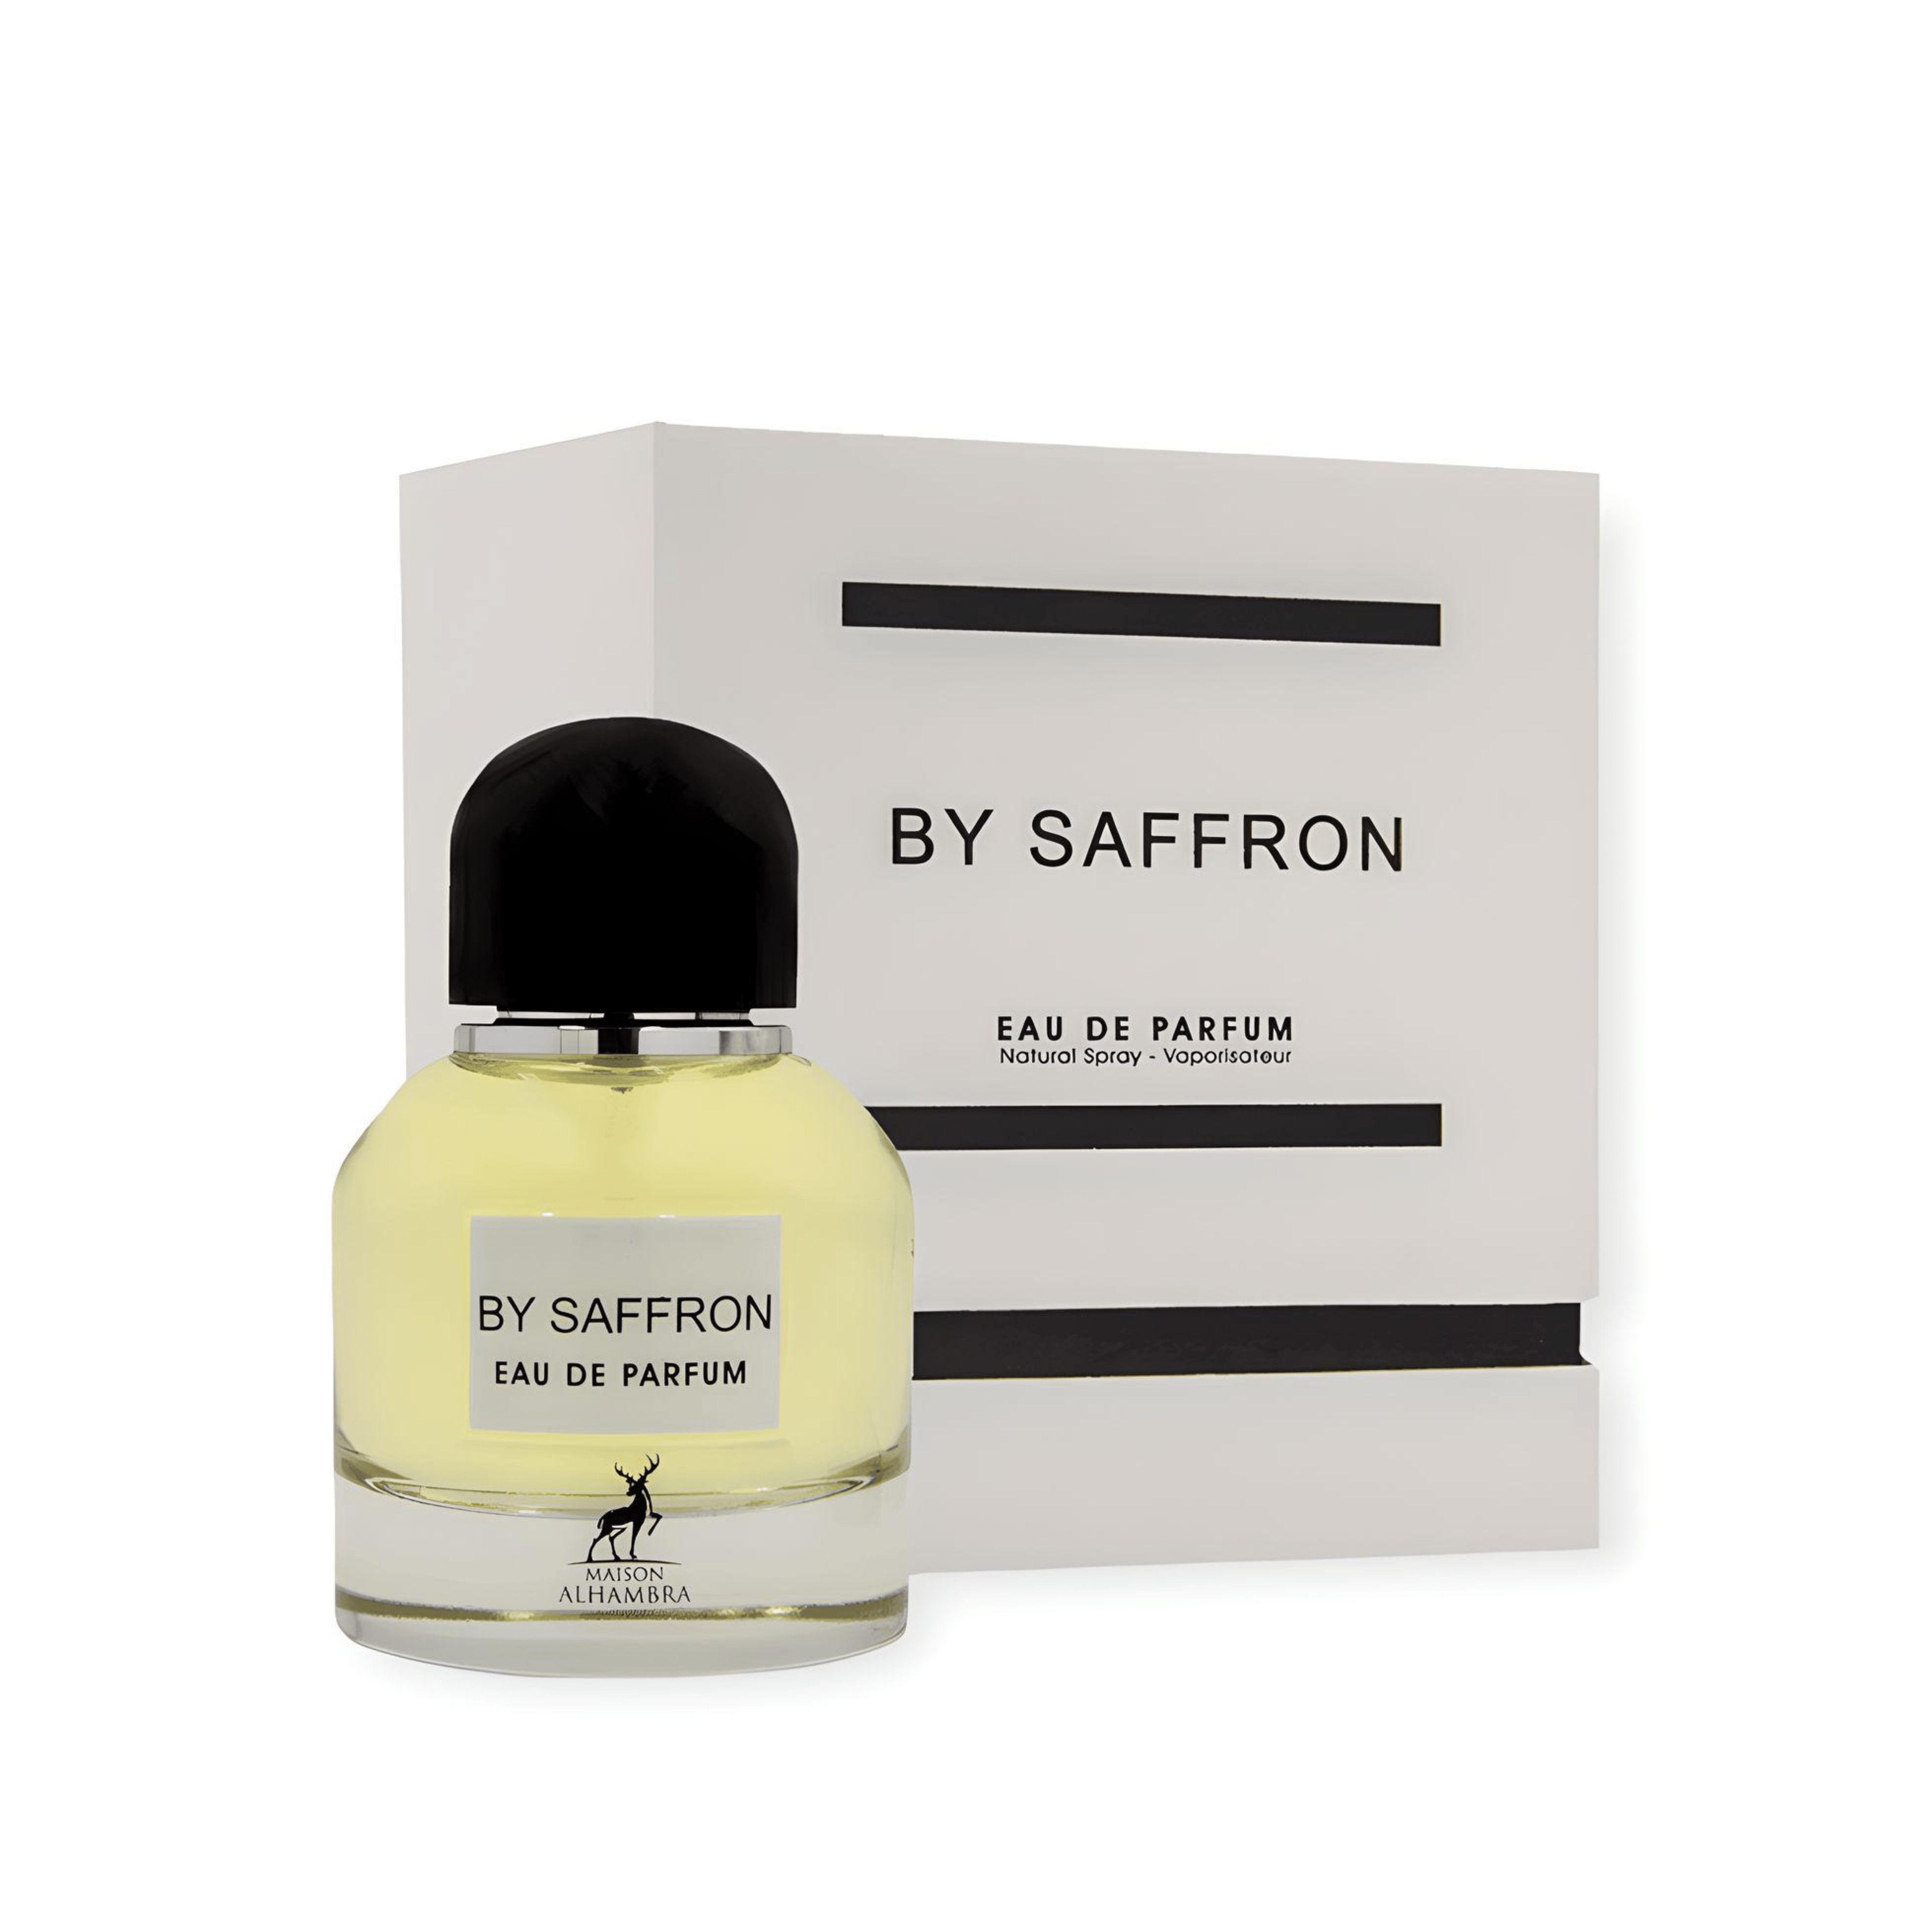 By Saffron 100ml EDP By Maison Alhambra | Soghaat Gifts & Fragrances